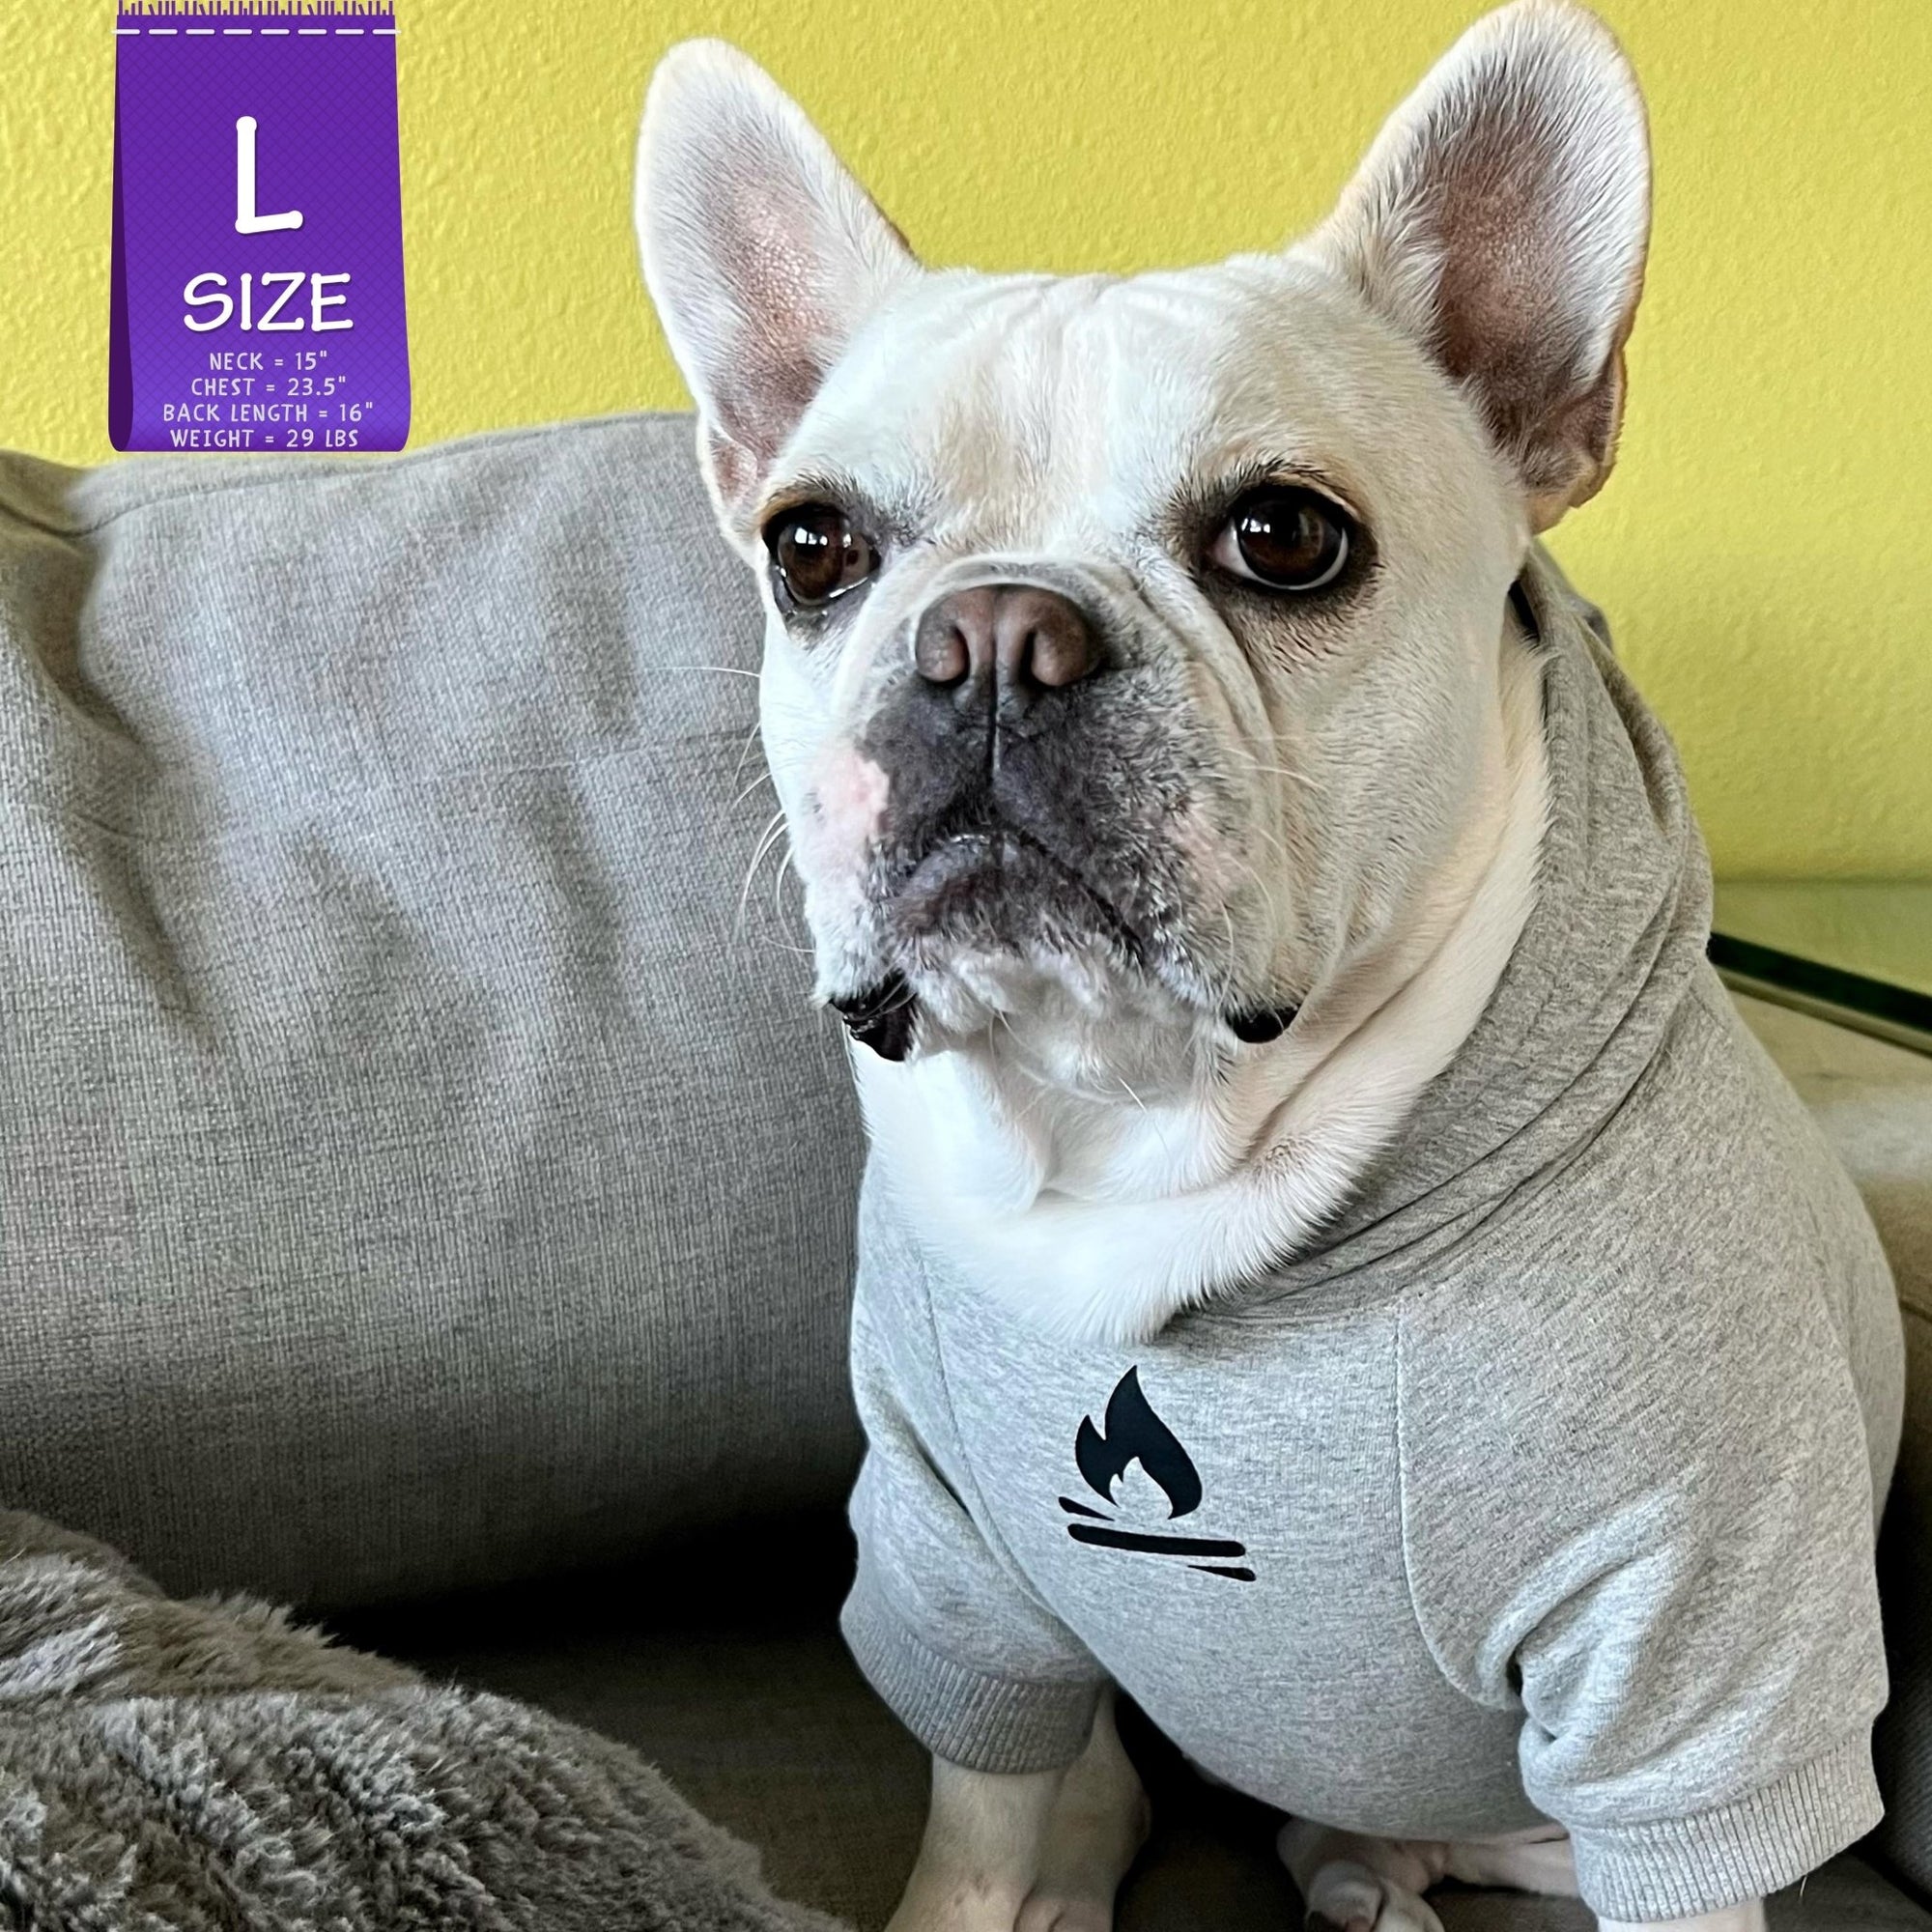 Dog Hoodie - Hoodies For Dogs - French Bulldog wearing &quot;Happy Camper&quot; dog hoodie in gray - campfire emoji on front chest - indoors sitting on a gray sofa - Wag Trendz